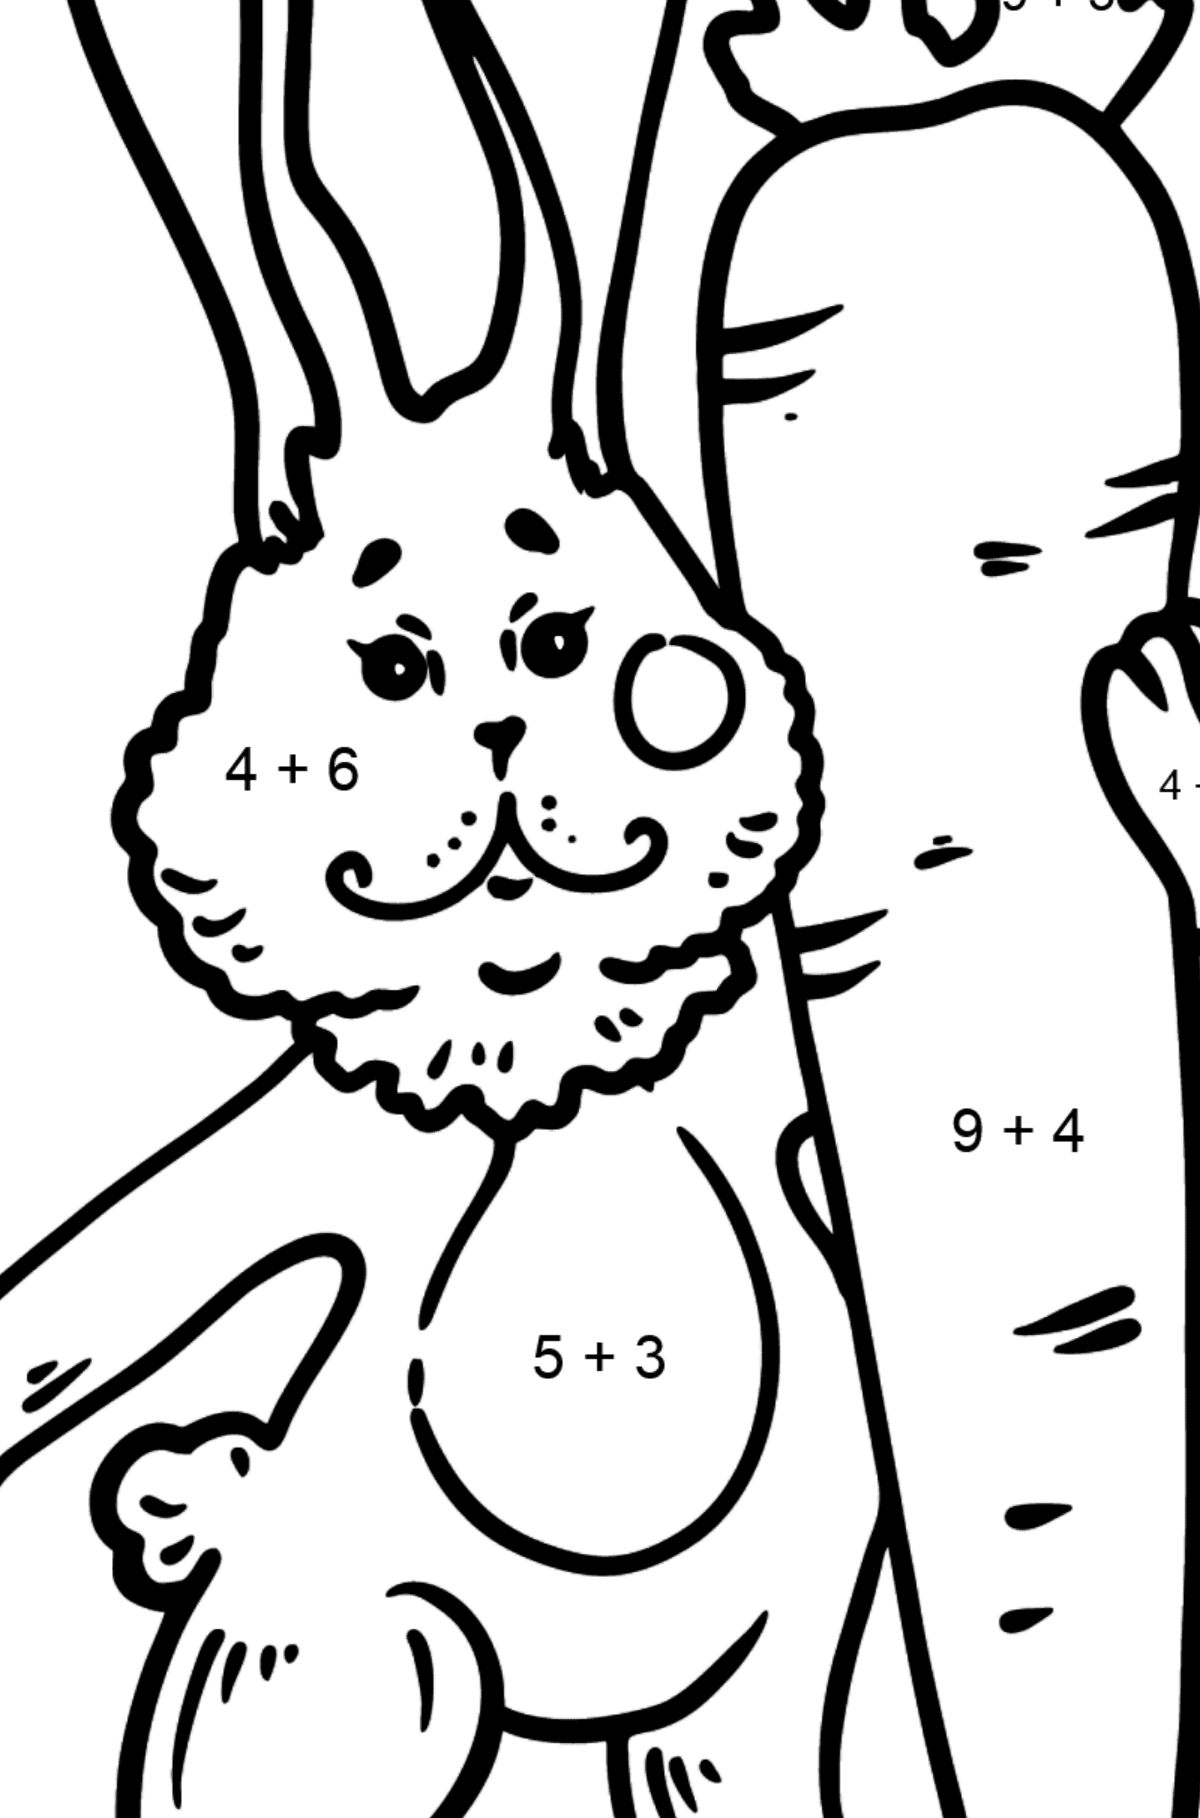 Bunny with Carrot coloring page - Math Coloring - Addition for Kids